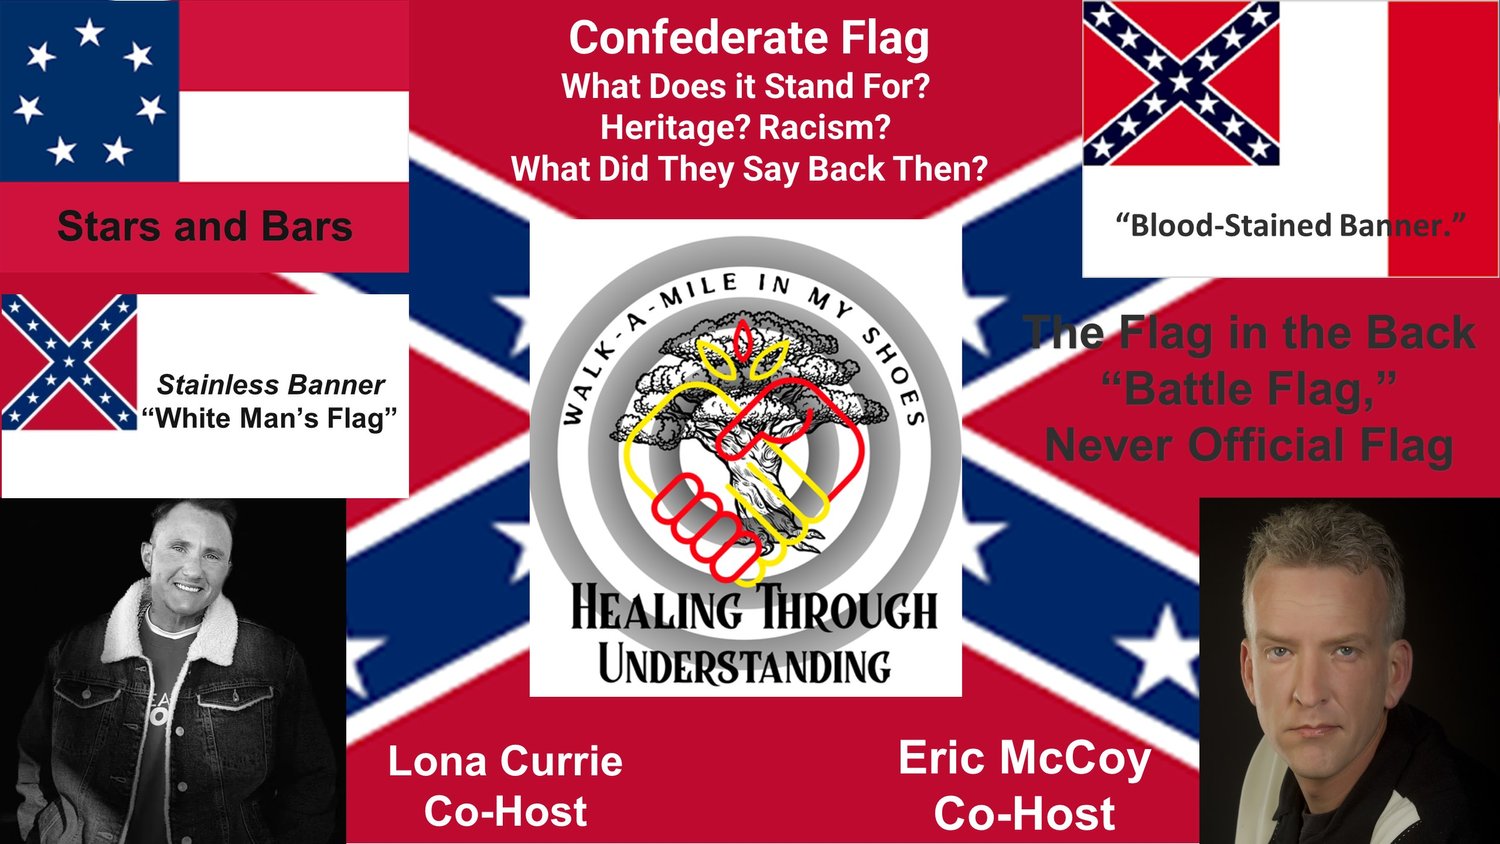 Confederate Flag. What Does it Stand For? Heritage? Racism? What Did They Say Back Then?